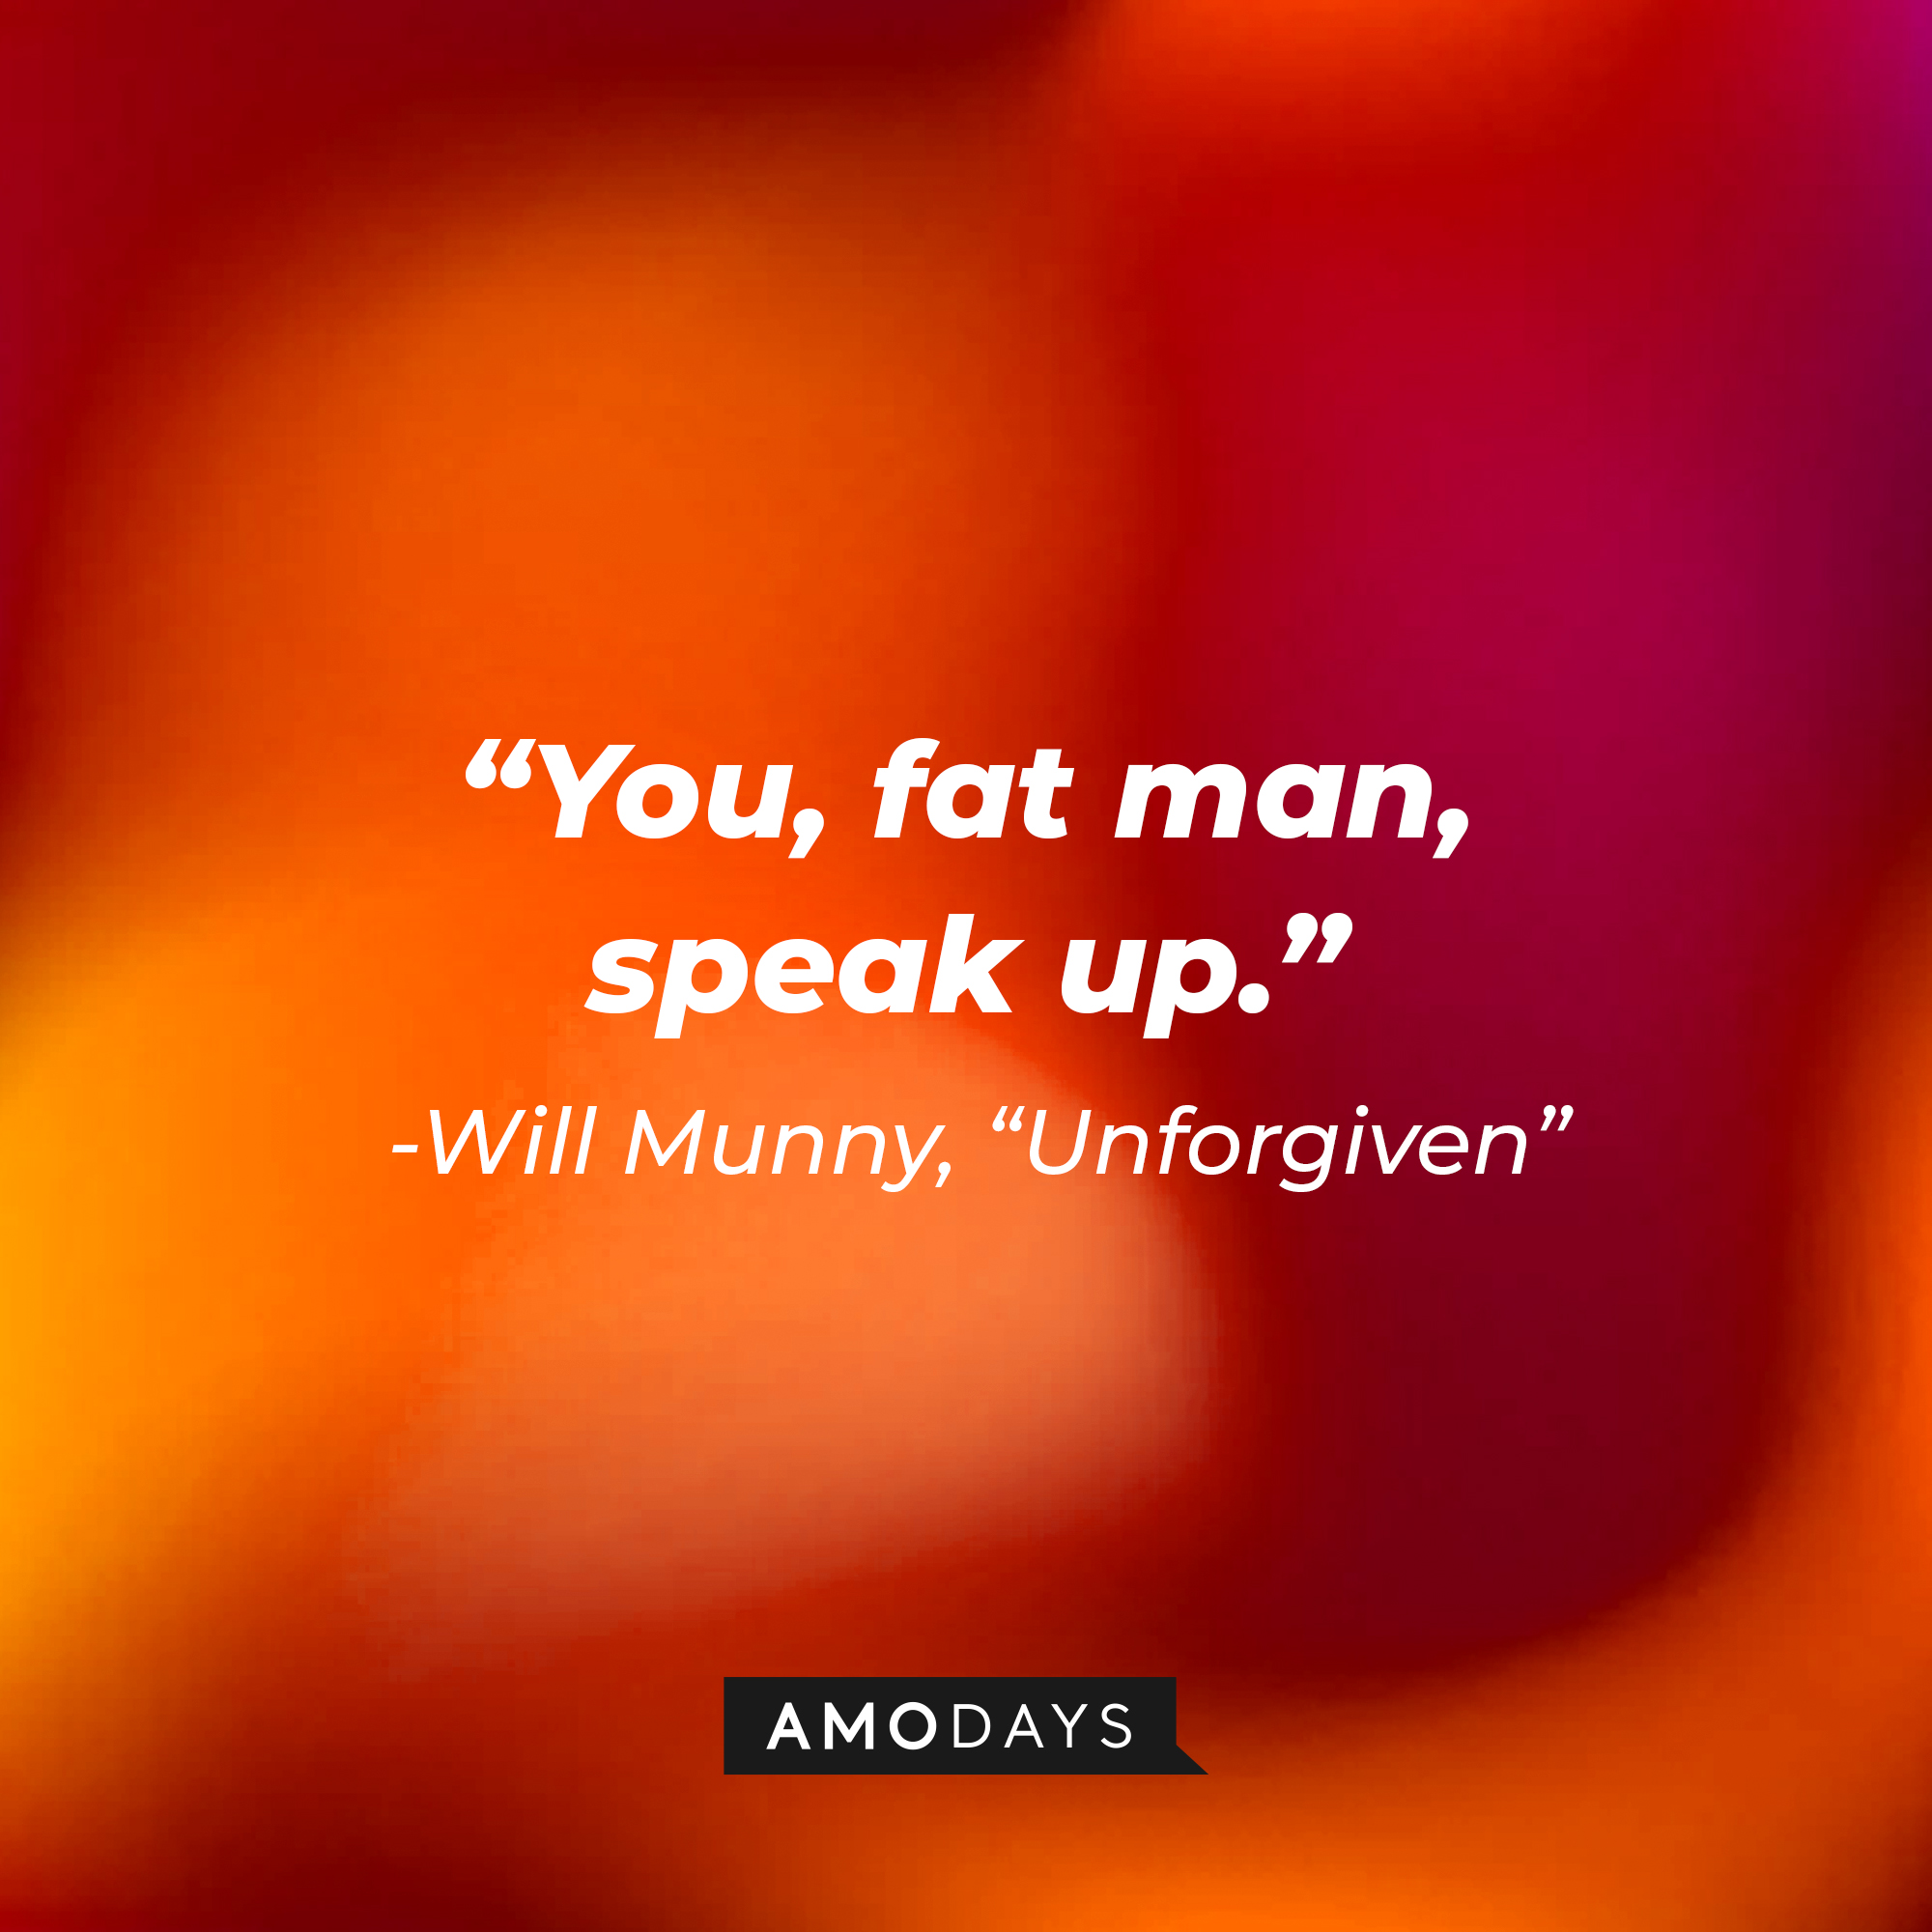 William Munny's quote in "Unforgiven:" "You, fat man, speak up." | Source: AmoDays